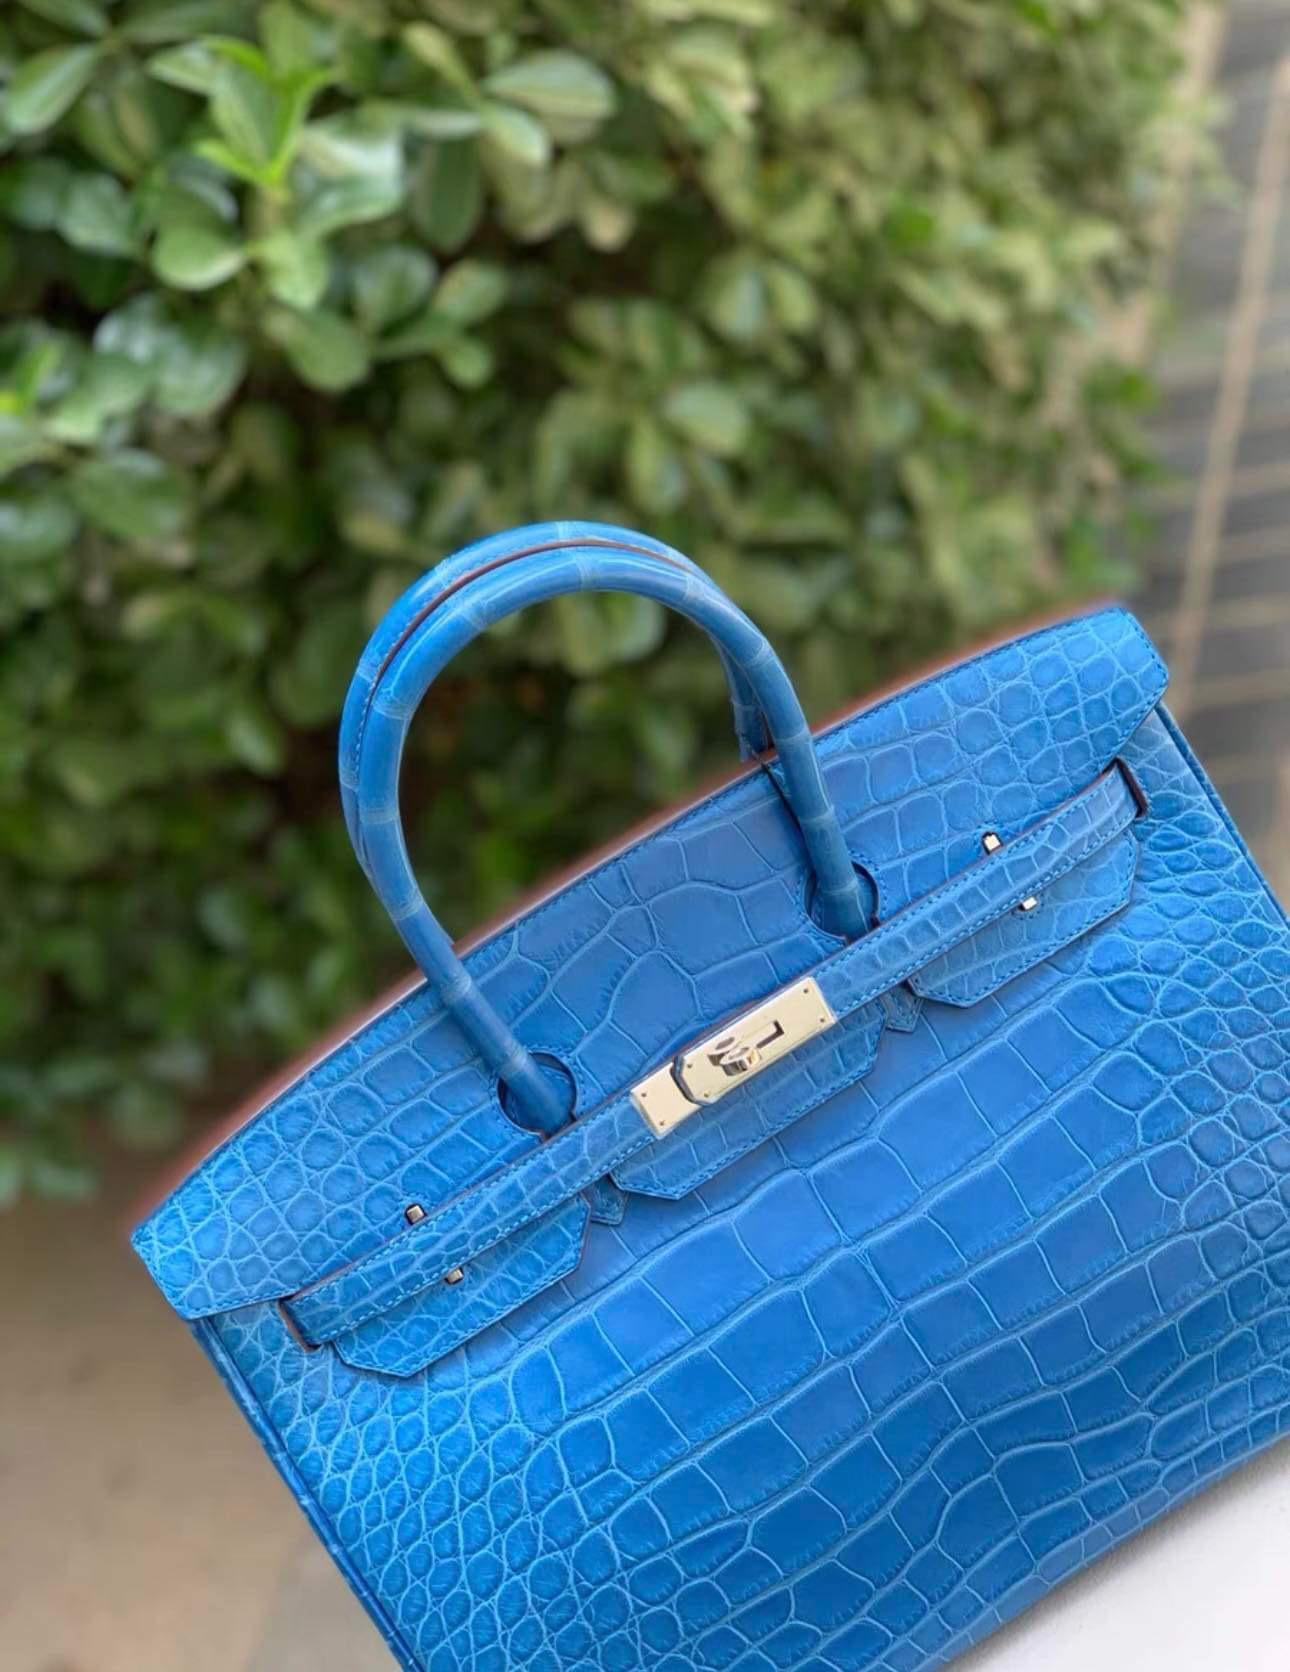 Rare MYKONOS blue in Matte Alligator is a collectors treasure. Fresh with palladium hardware this beauty is over the top divine and rare!  BRAND NEW, NEVER WORN.  Comes with lock, keys, clochette, sleeper, original orange HERMES box.   
This Birkin